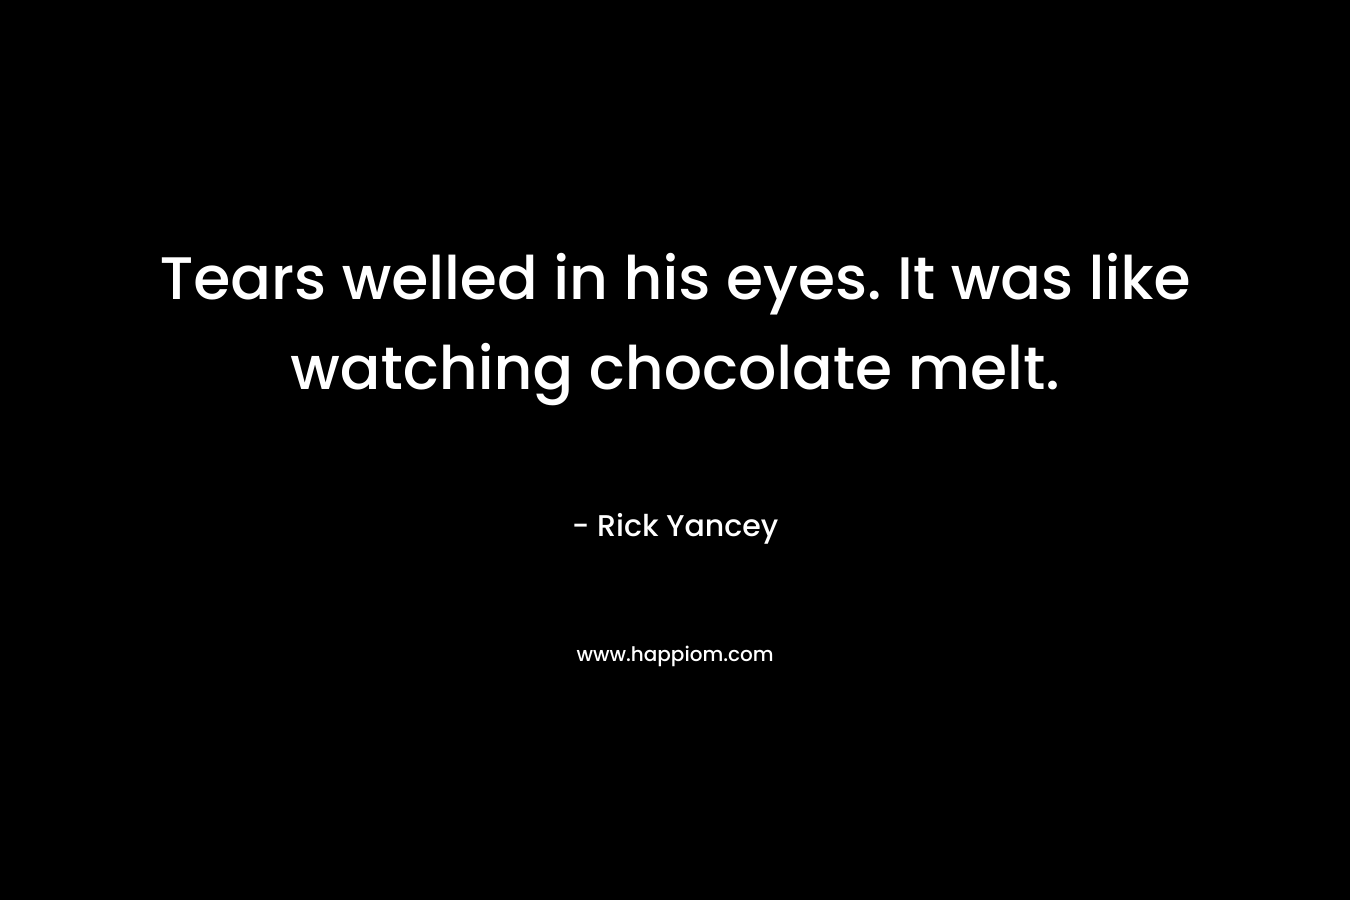 Tears welled in his eyes. It was like watching chocolate melt. – Rick Yancey